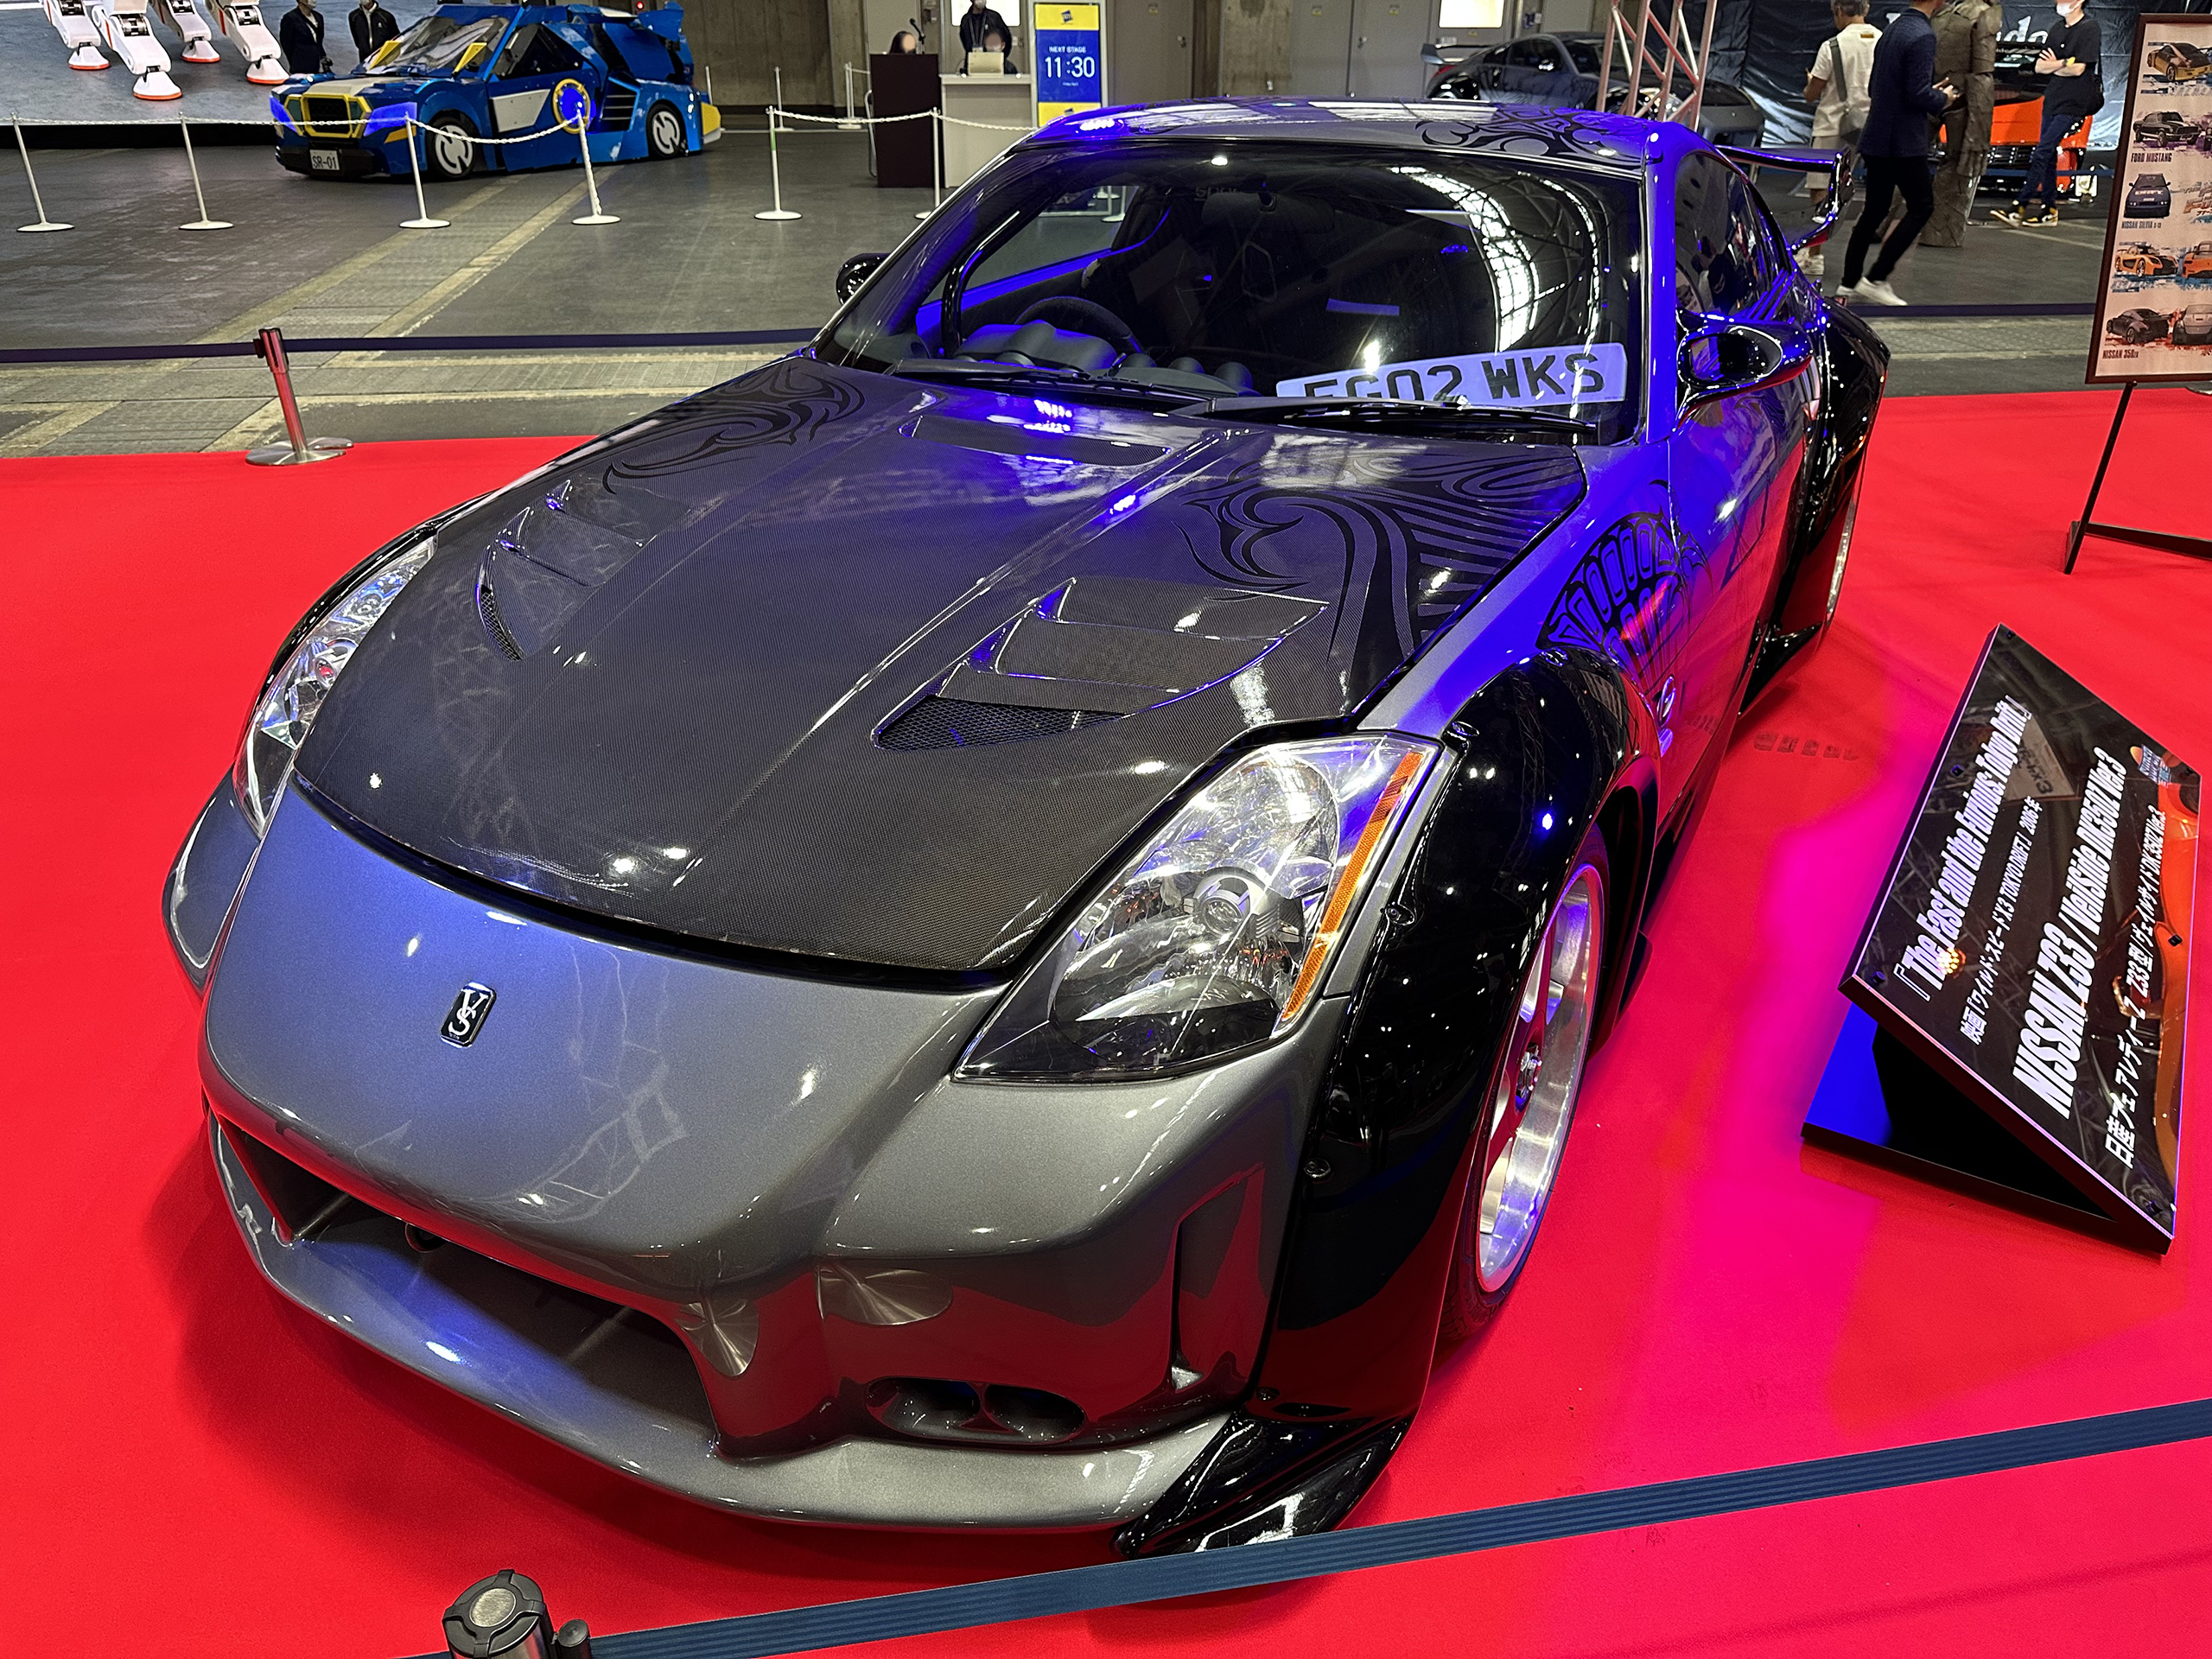 The Fast And The Furious: Tokyo Drift' Nissan 350Z Can Be Yours